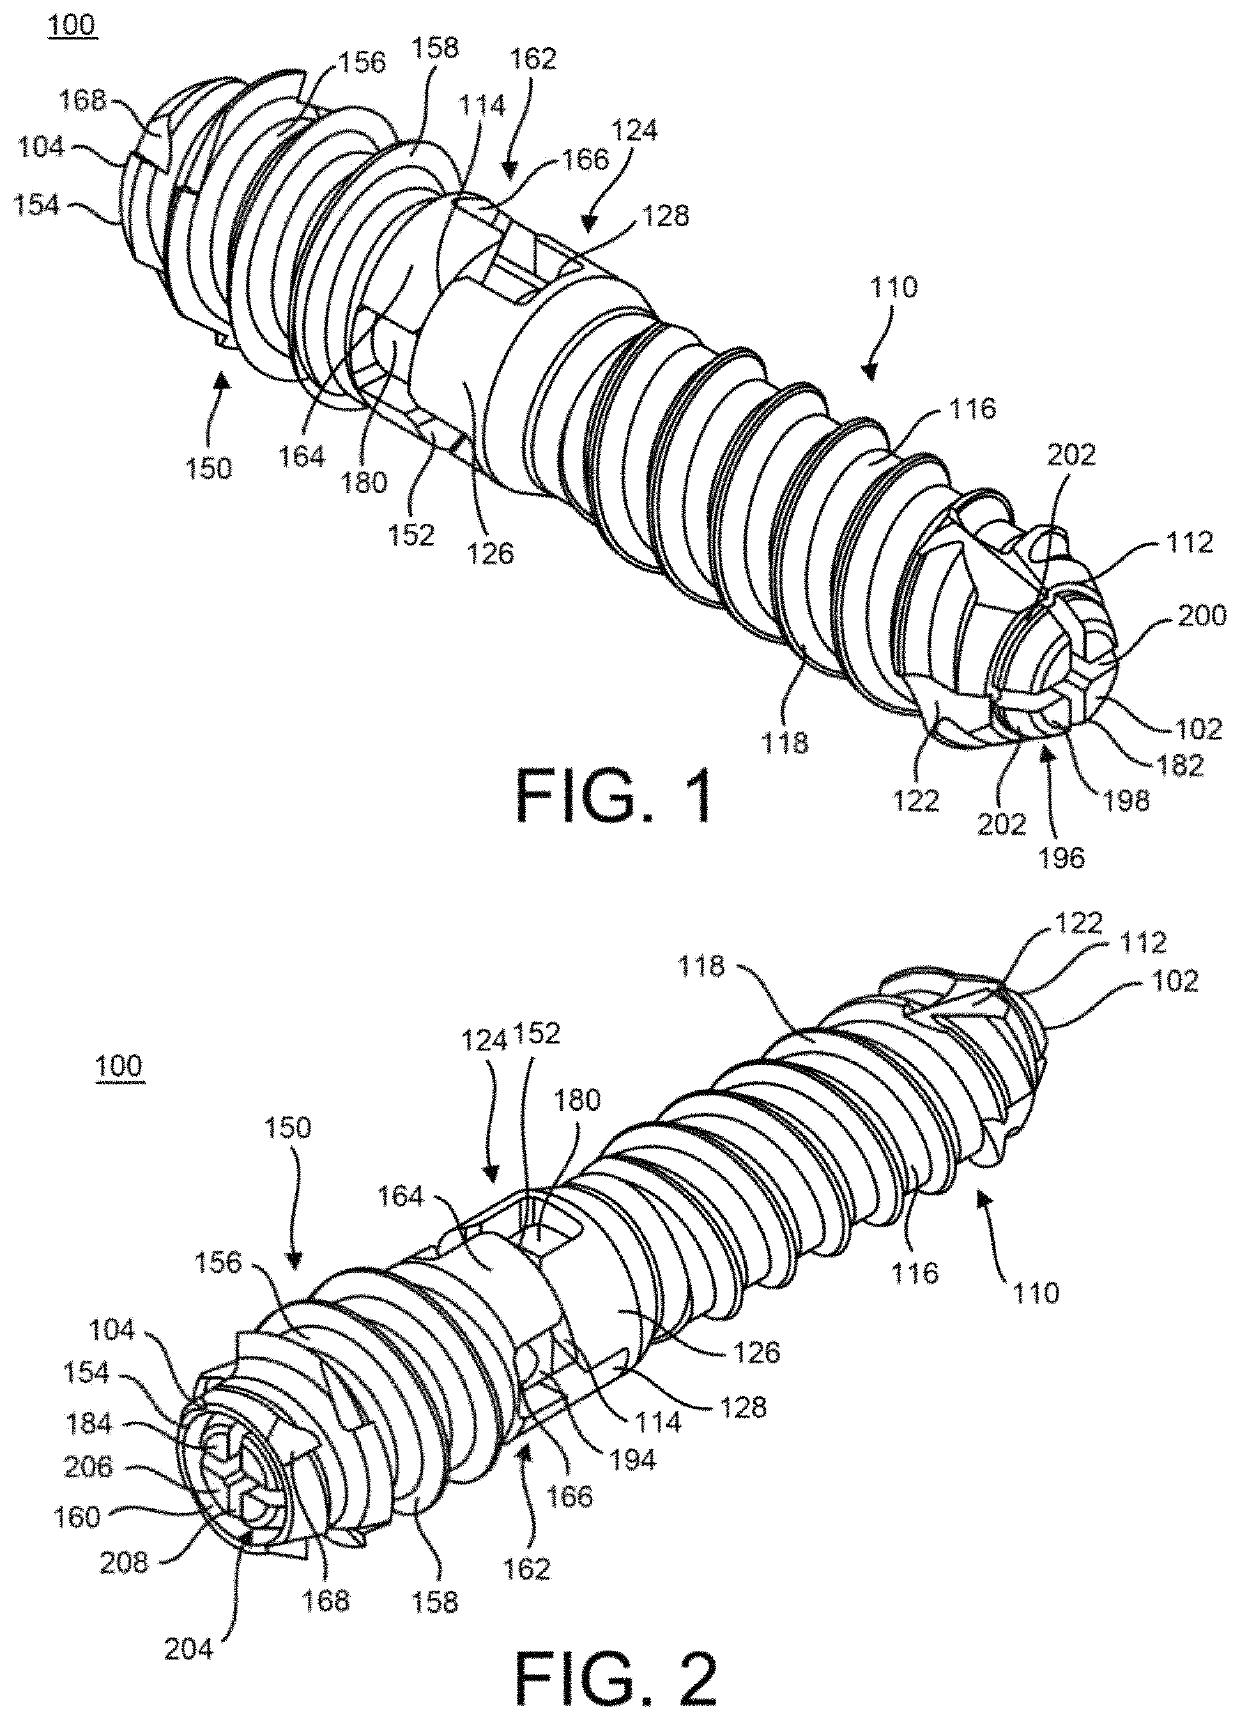 Implants, systems, and methods of use and assembly